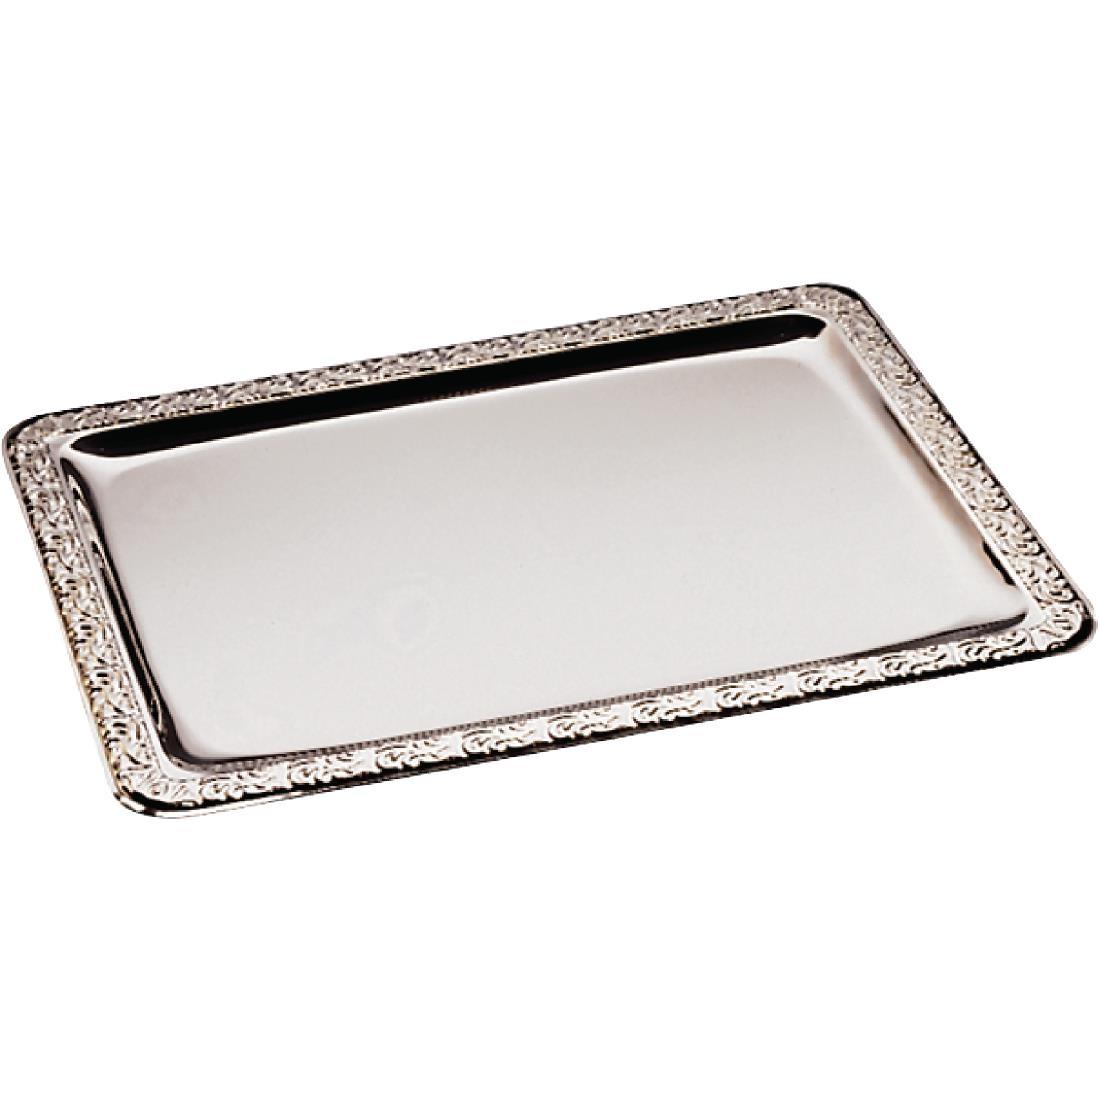 APS Stainless Steel Service Tray 600mm - CF027  - 1